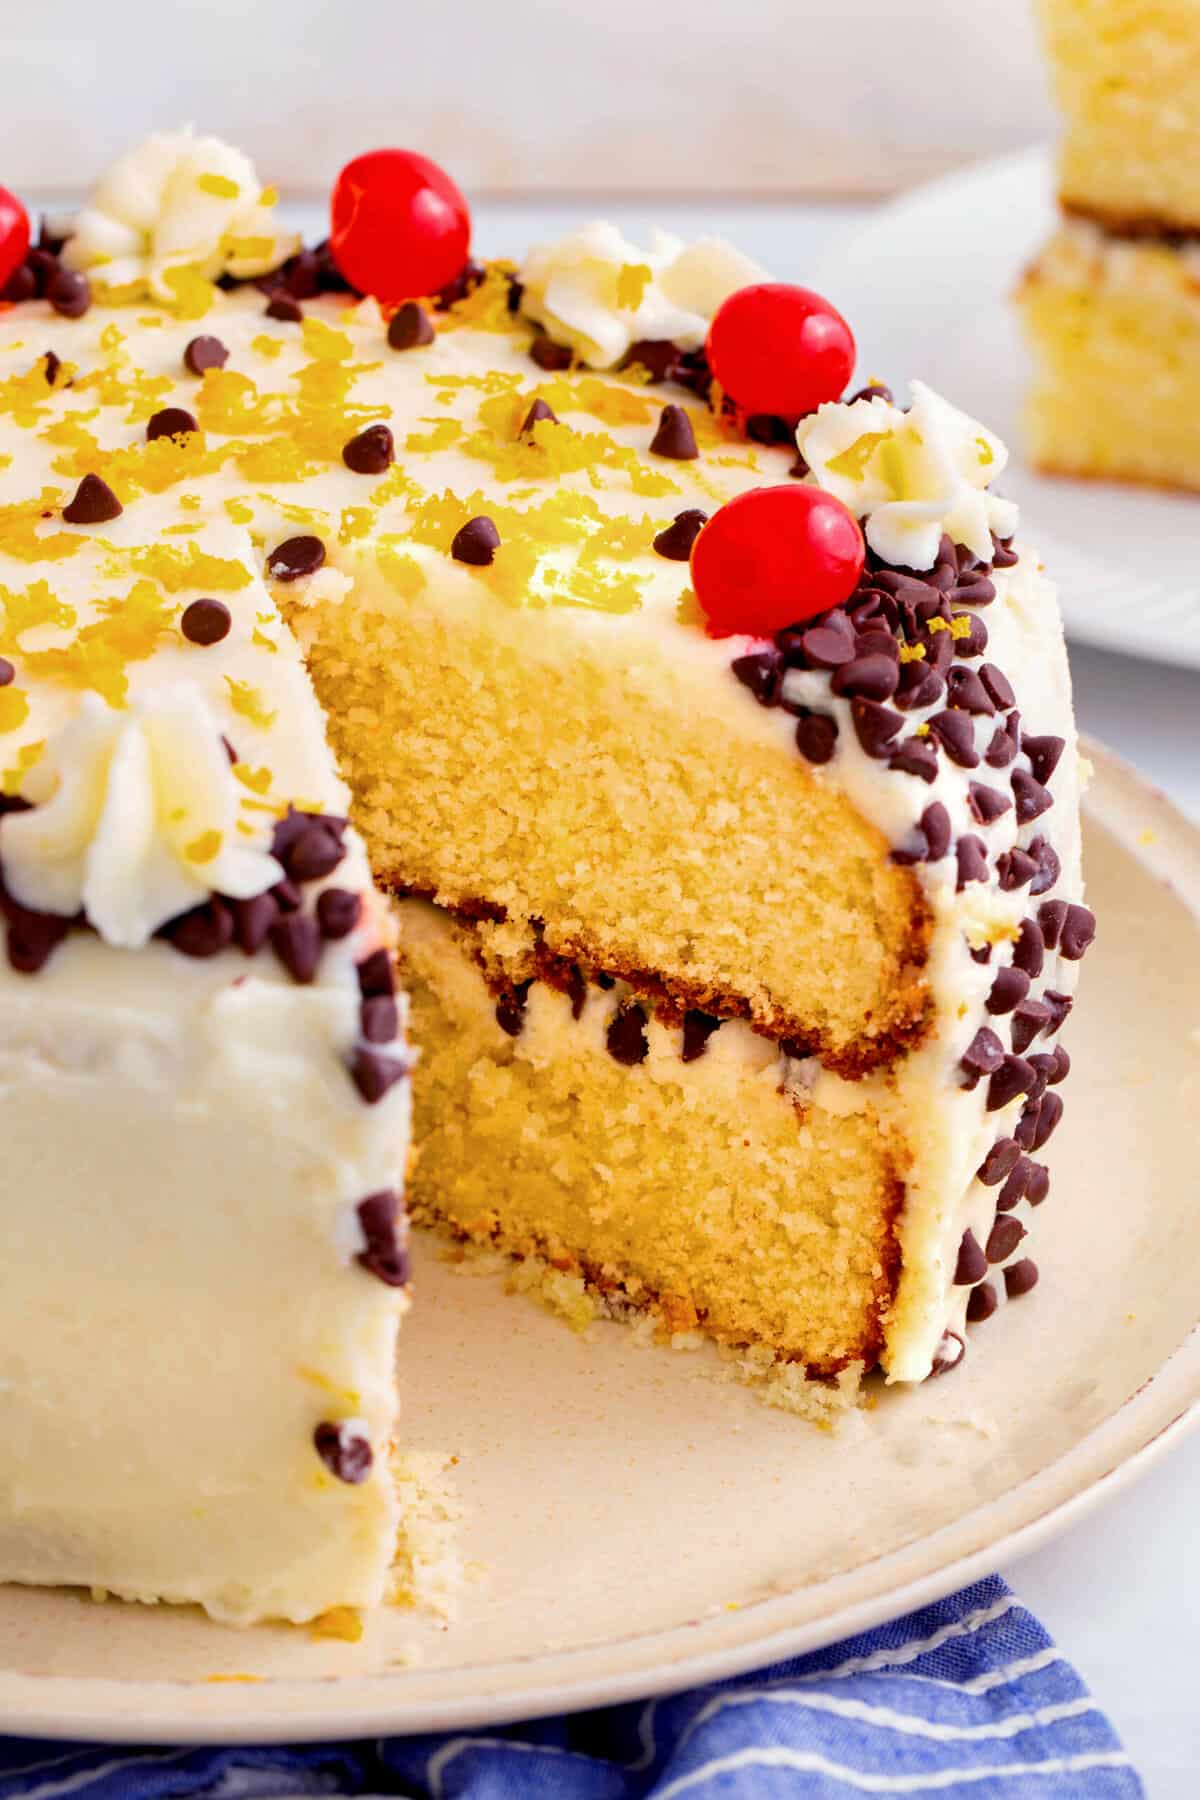 close up image of cannoli cake showing the cross section